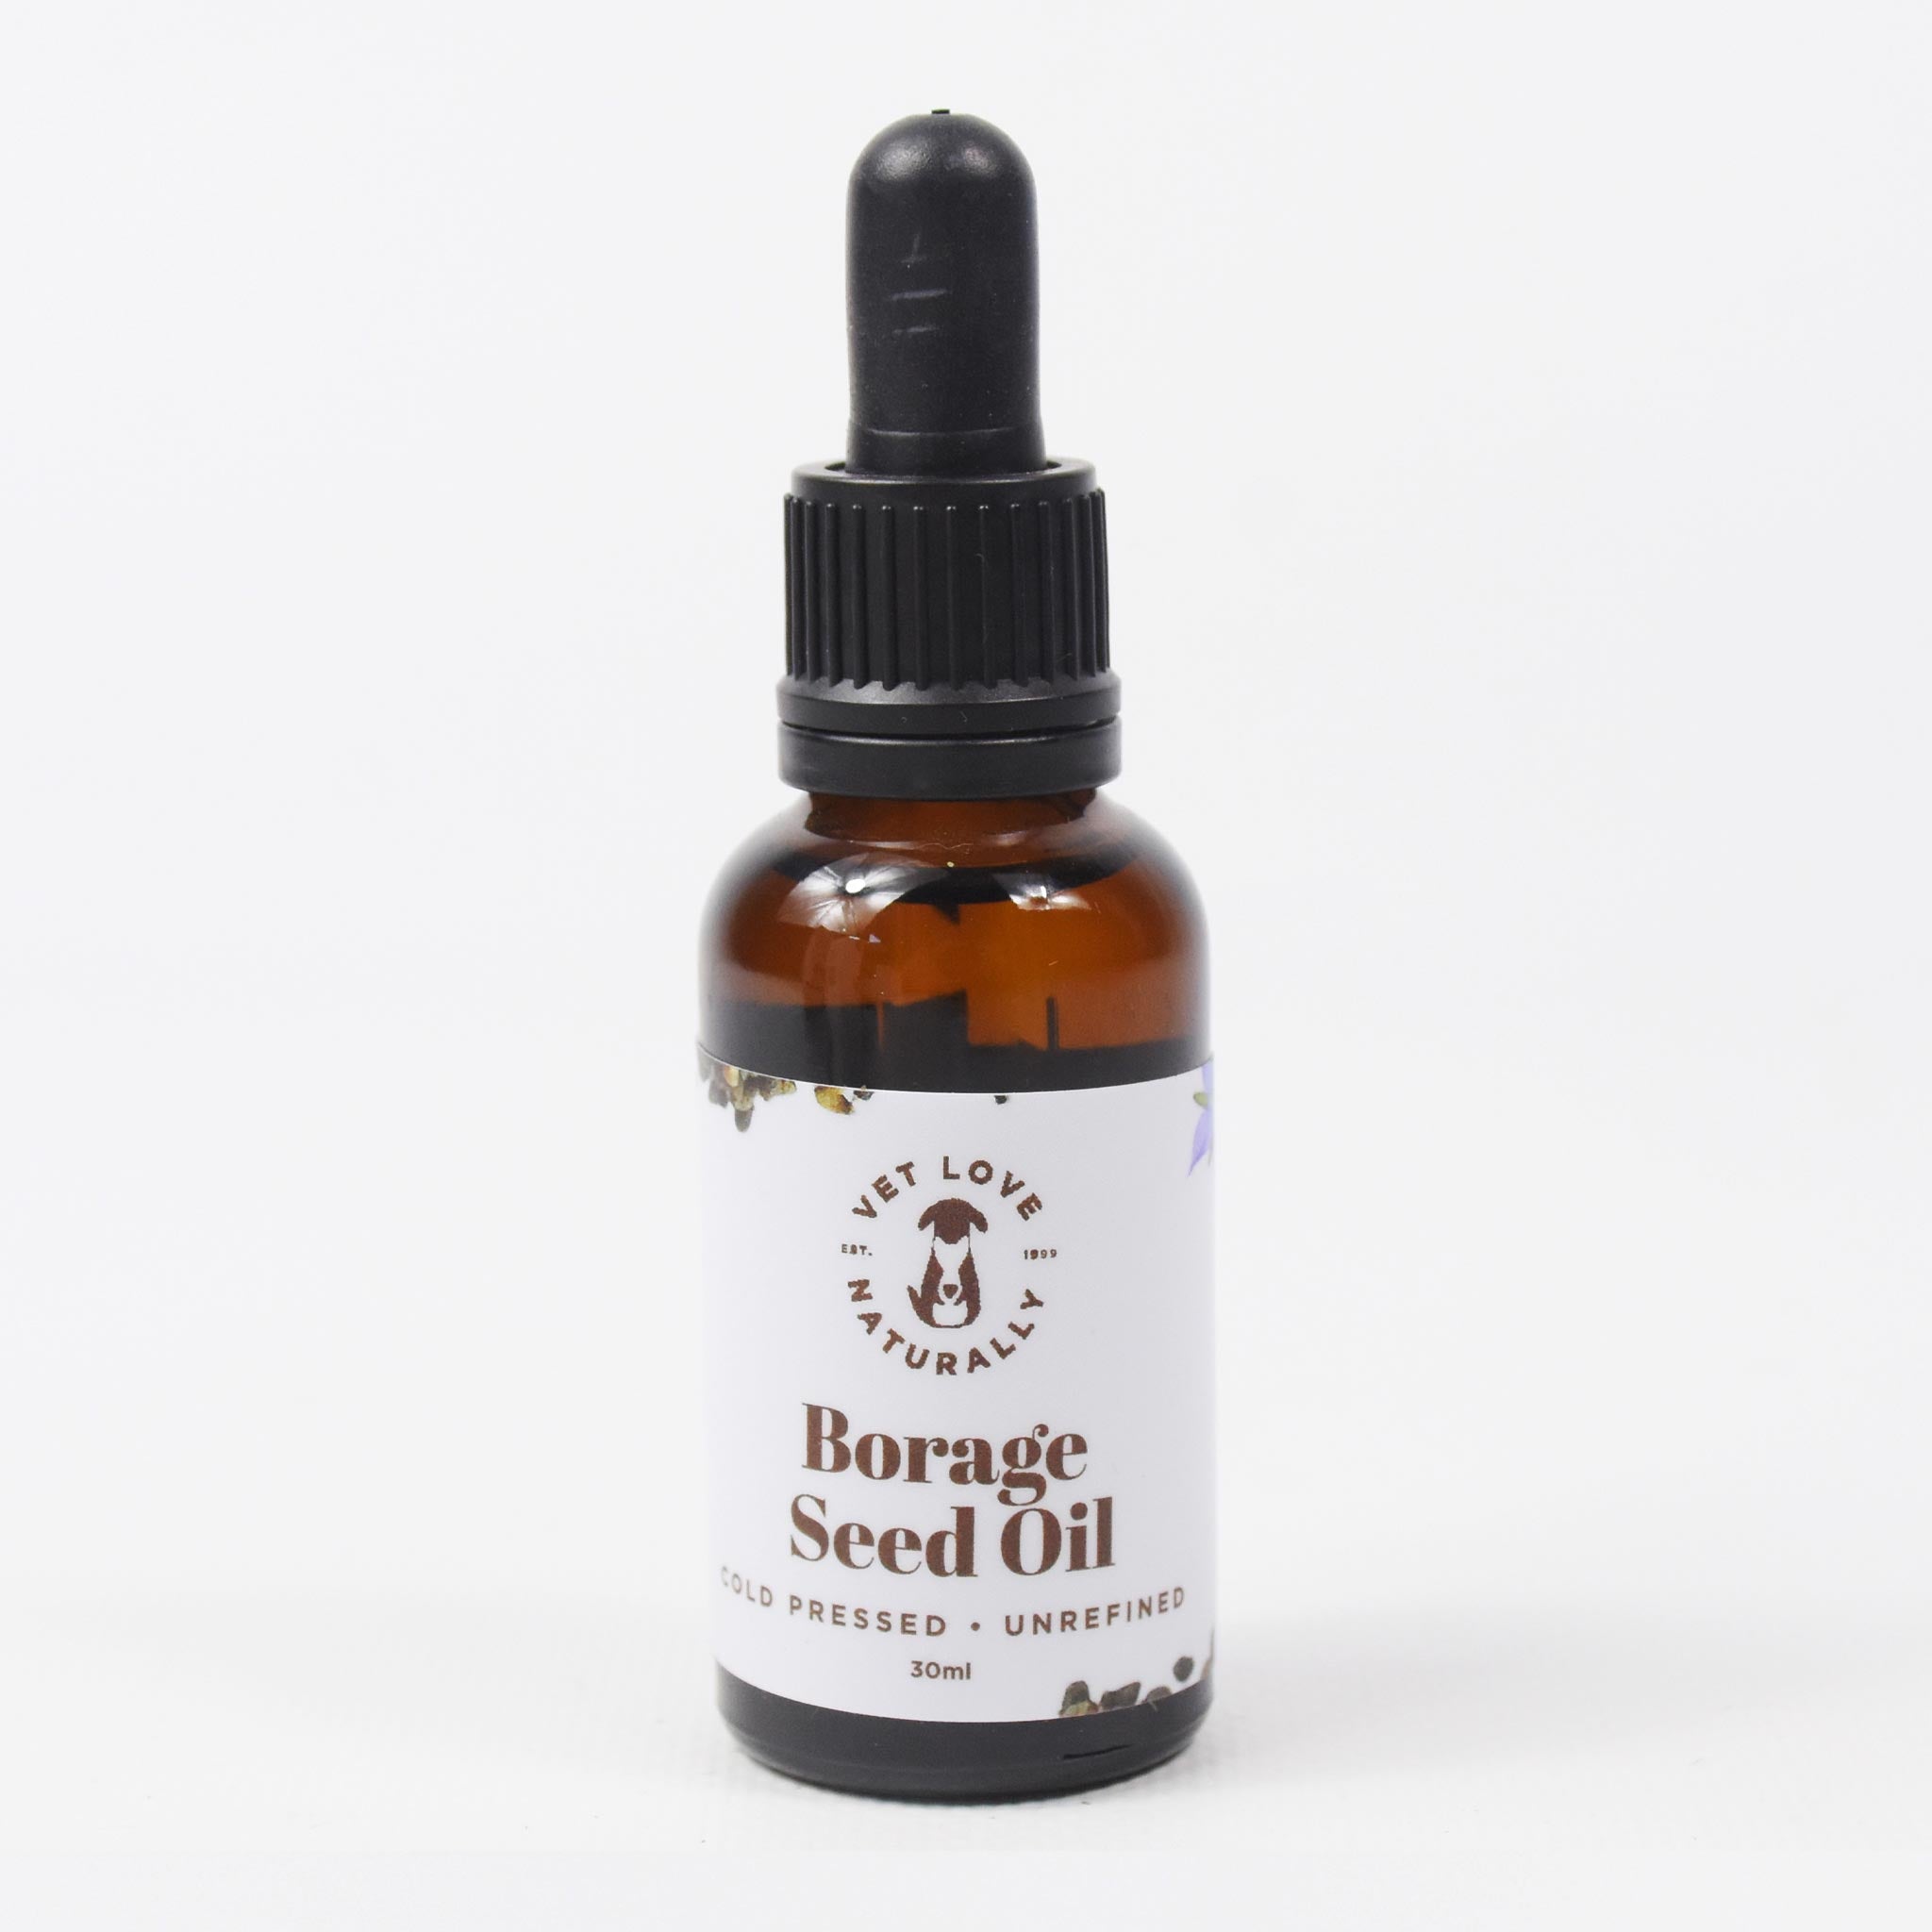 The Olive's Kitchen Borage Seed oil